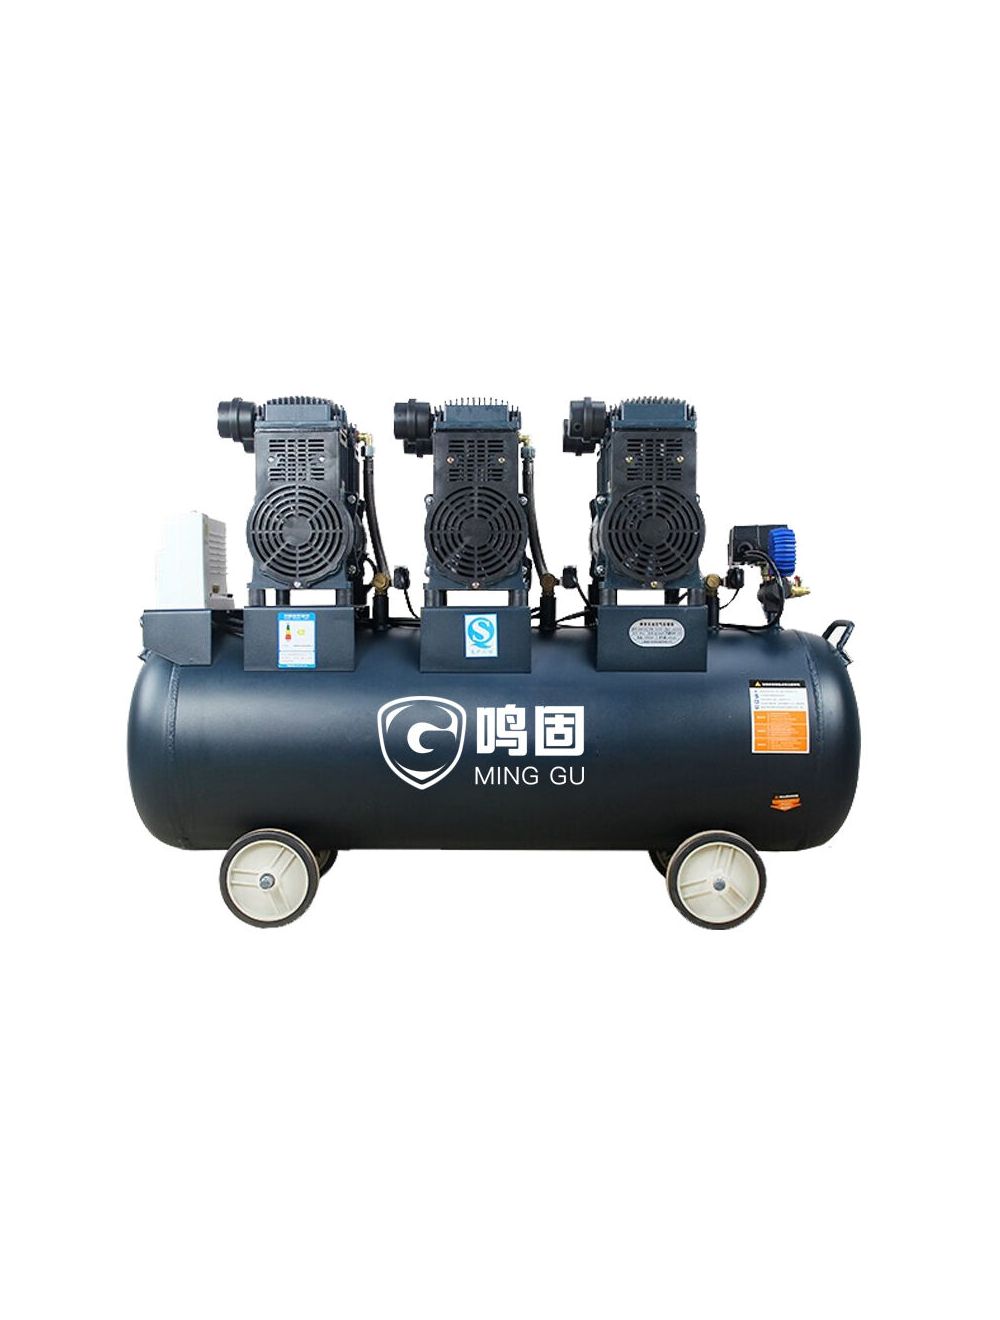 New In stock for sale, MING GU Air Compressor 980WX3-70L